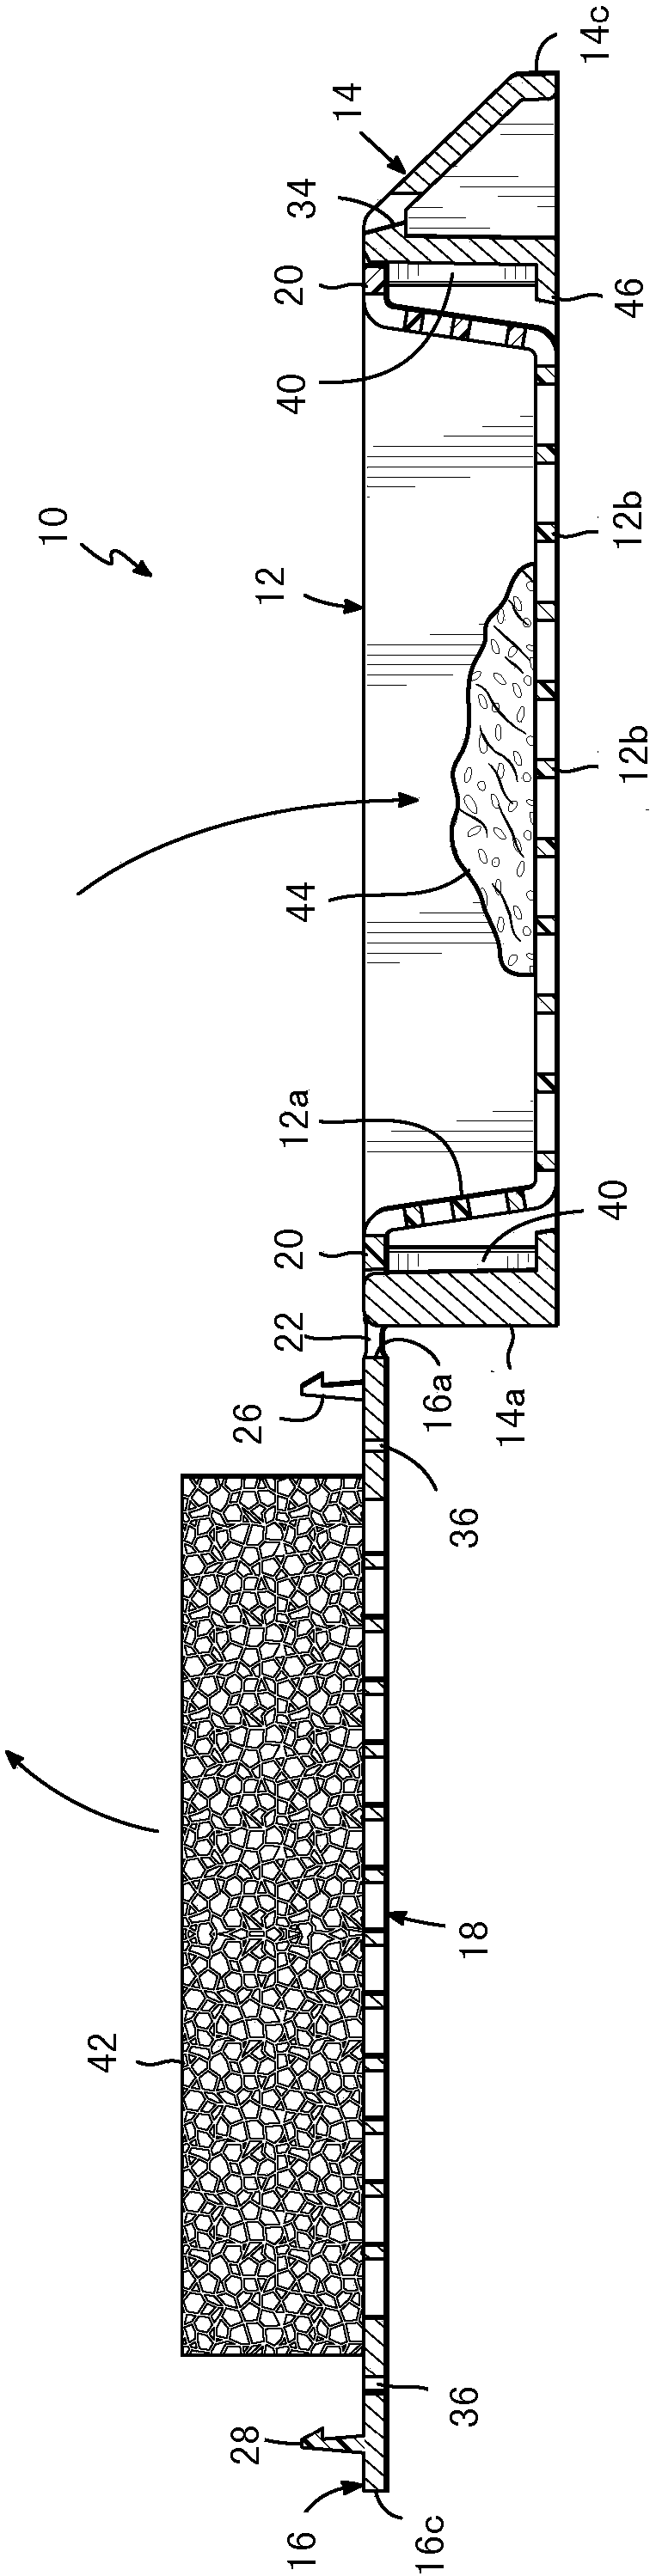 Sectionable cassette and embedding frame with tissue immobilizing separable lid, and methods for preparing biopsy tissue samples